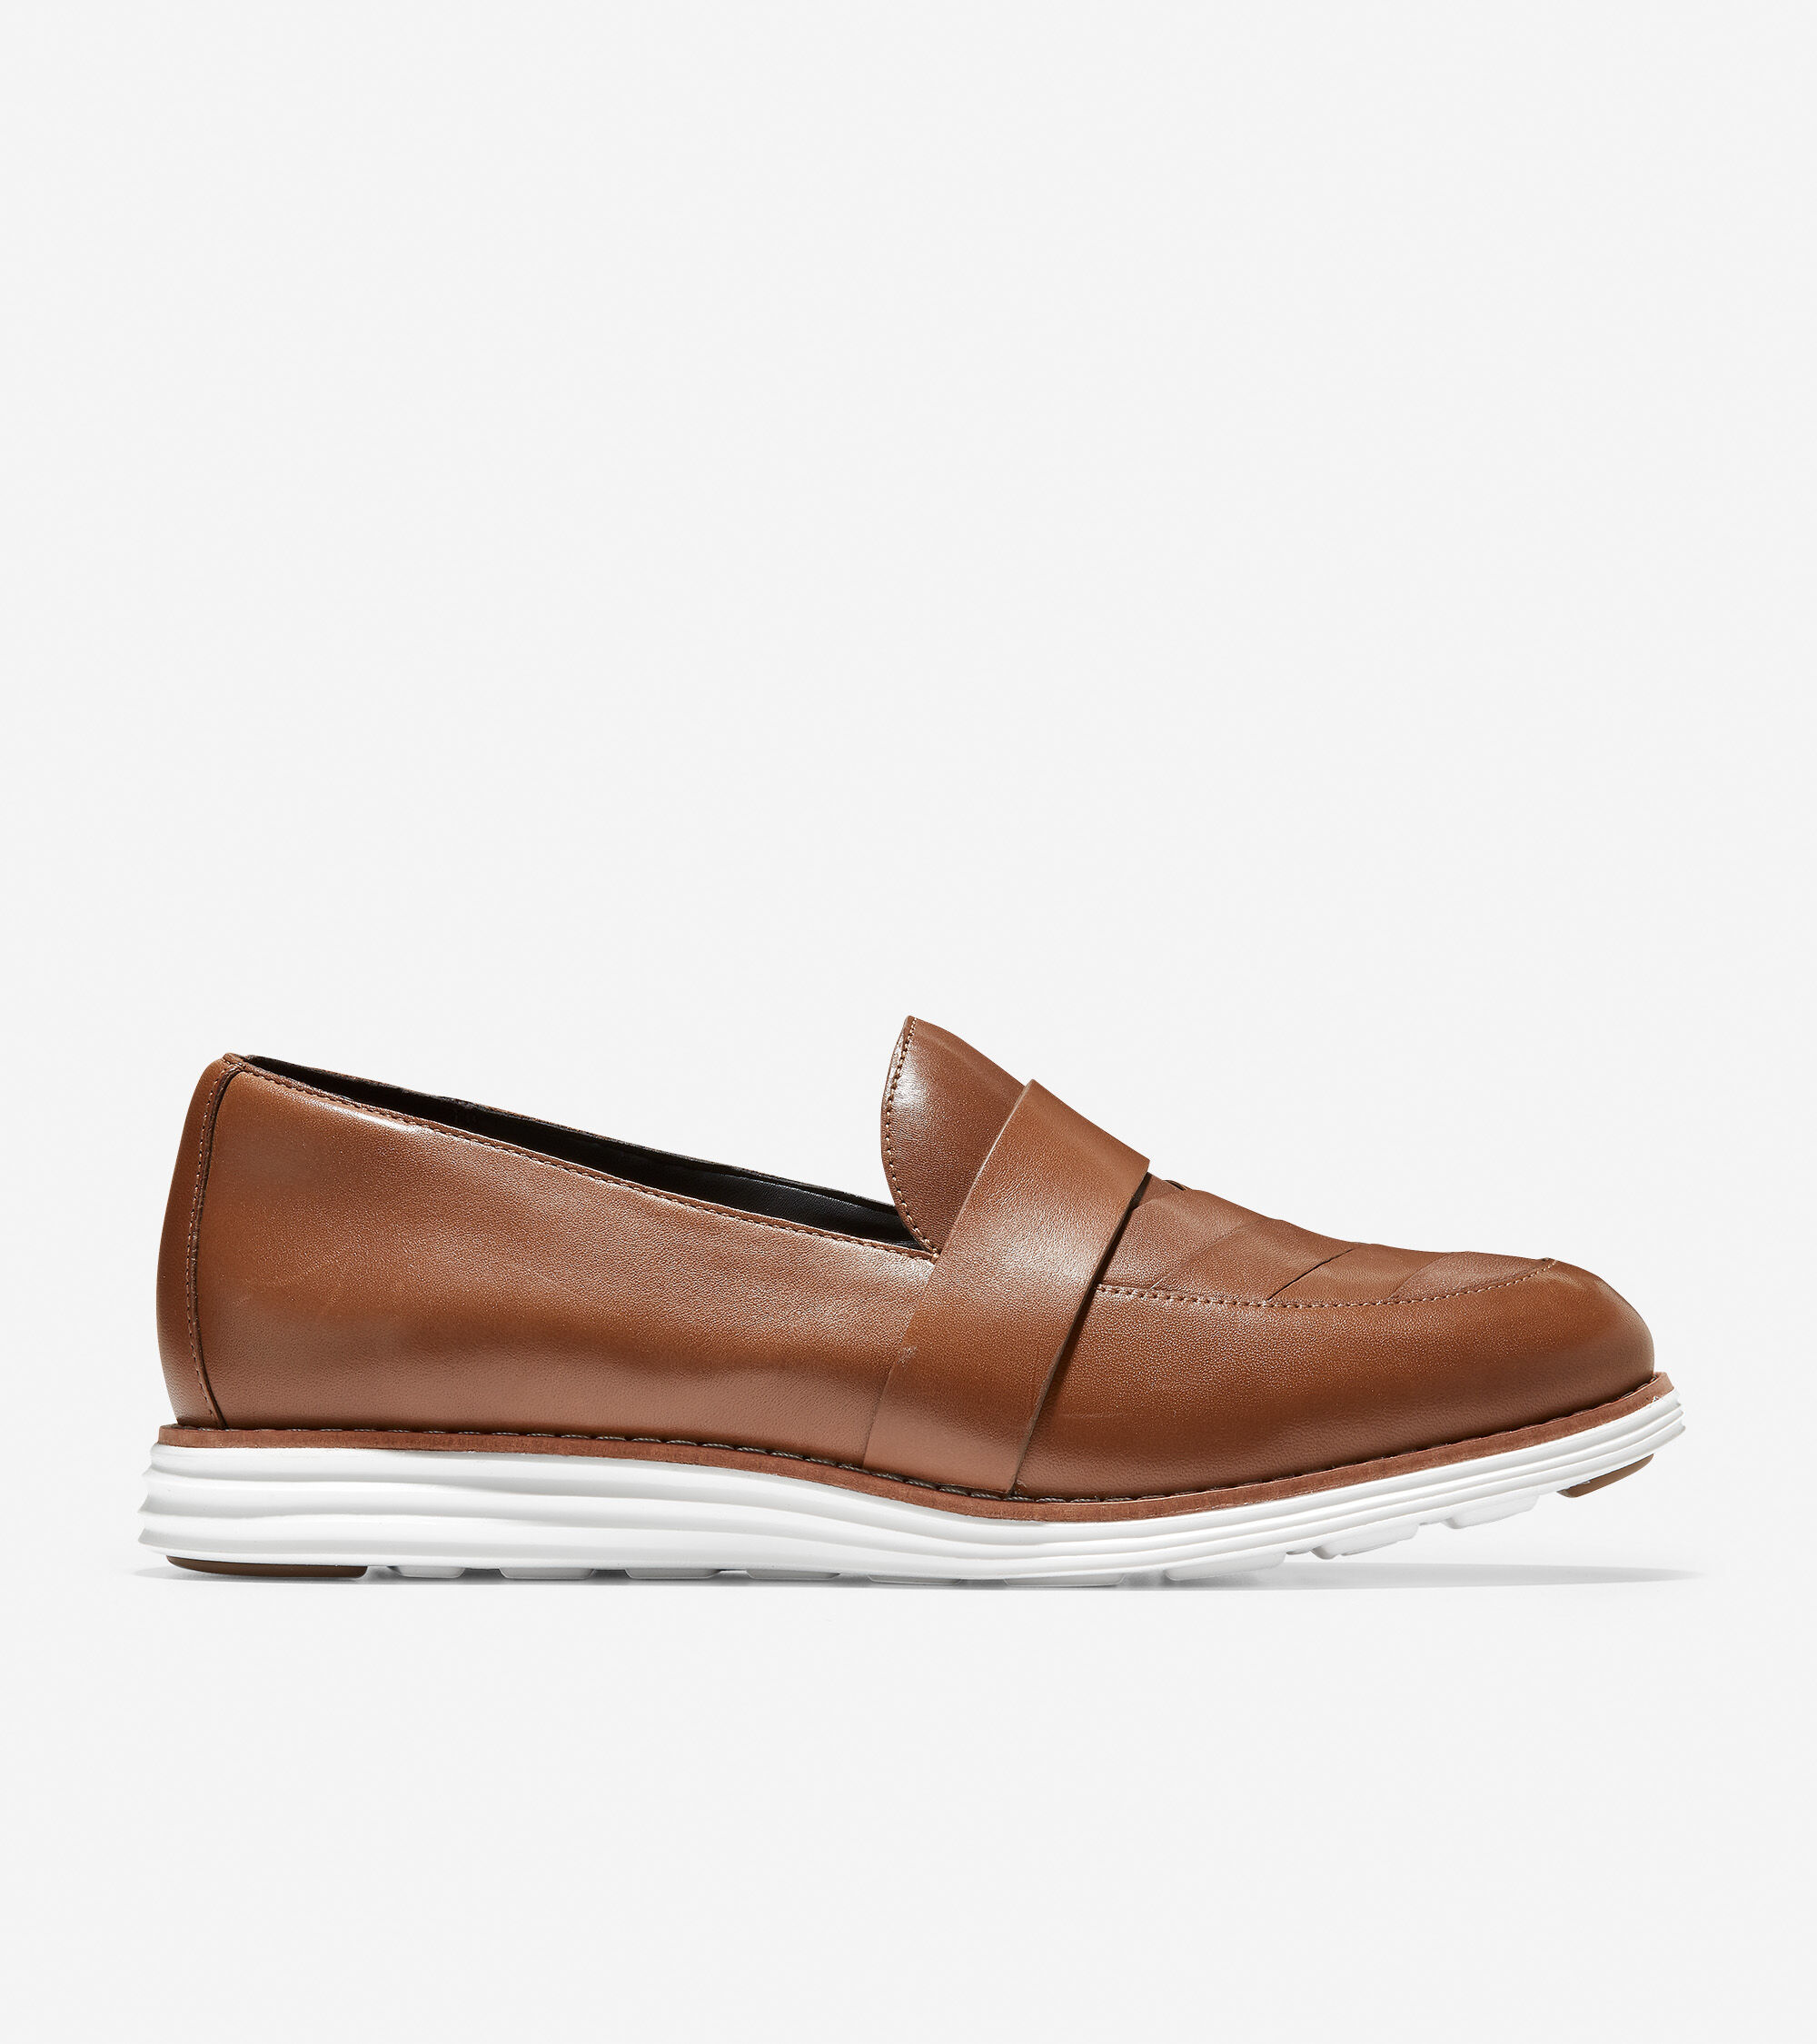 Women's Loafers \u0026 Driving Shoes | Cole Haan